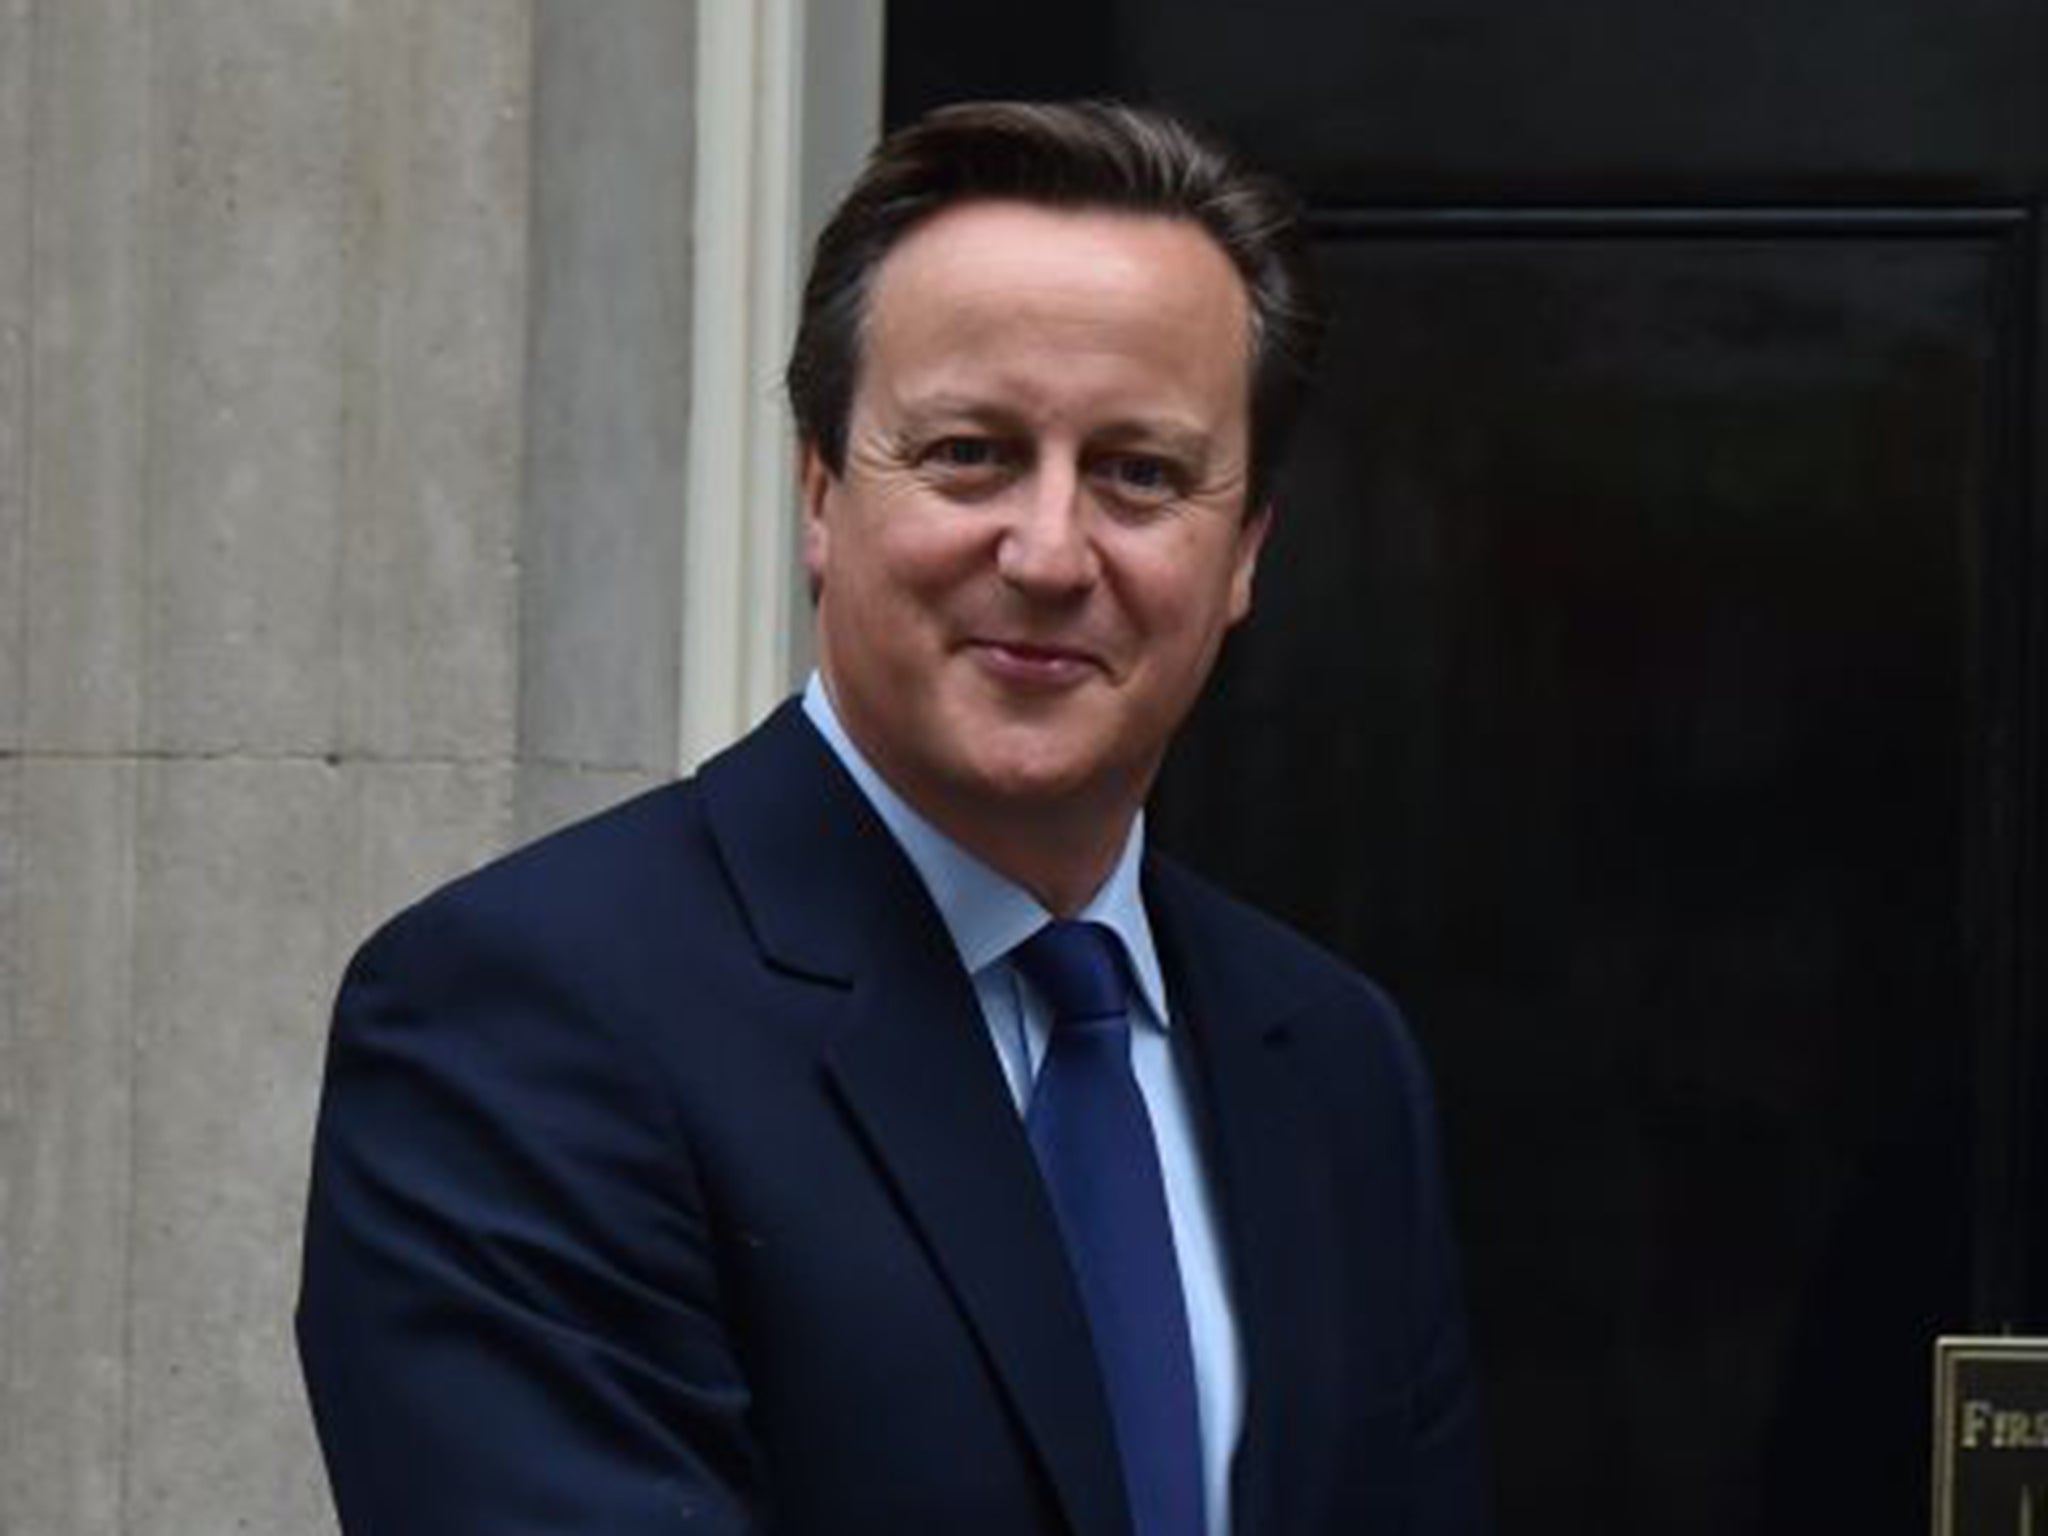 David Cameron has previously said it would be “unthinkable” for Assad to remain in power